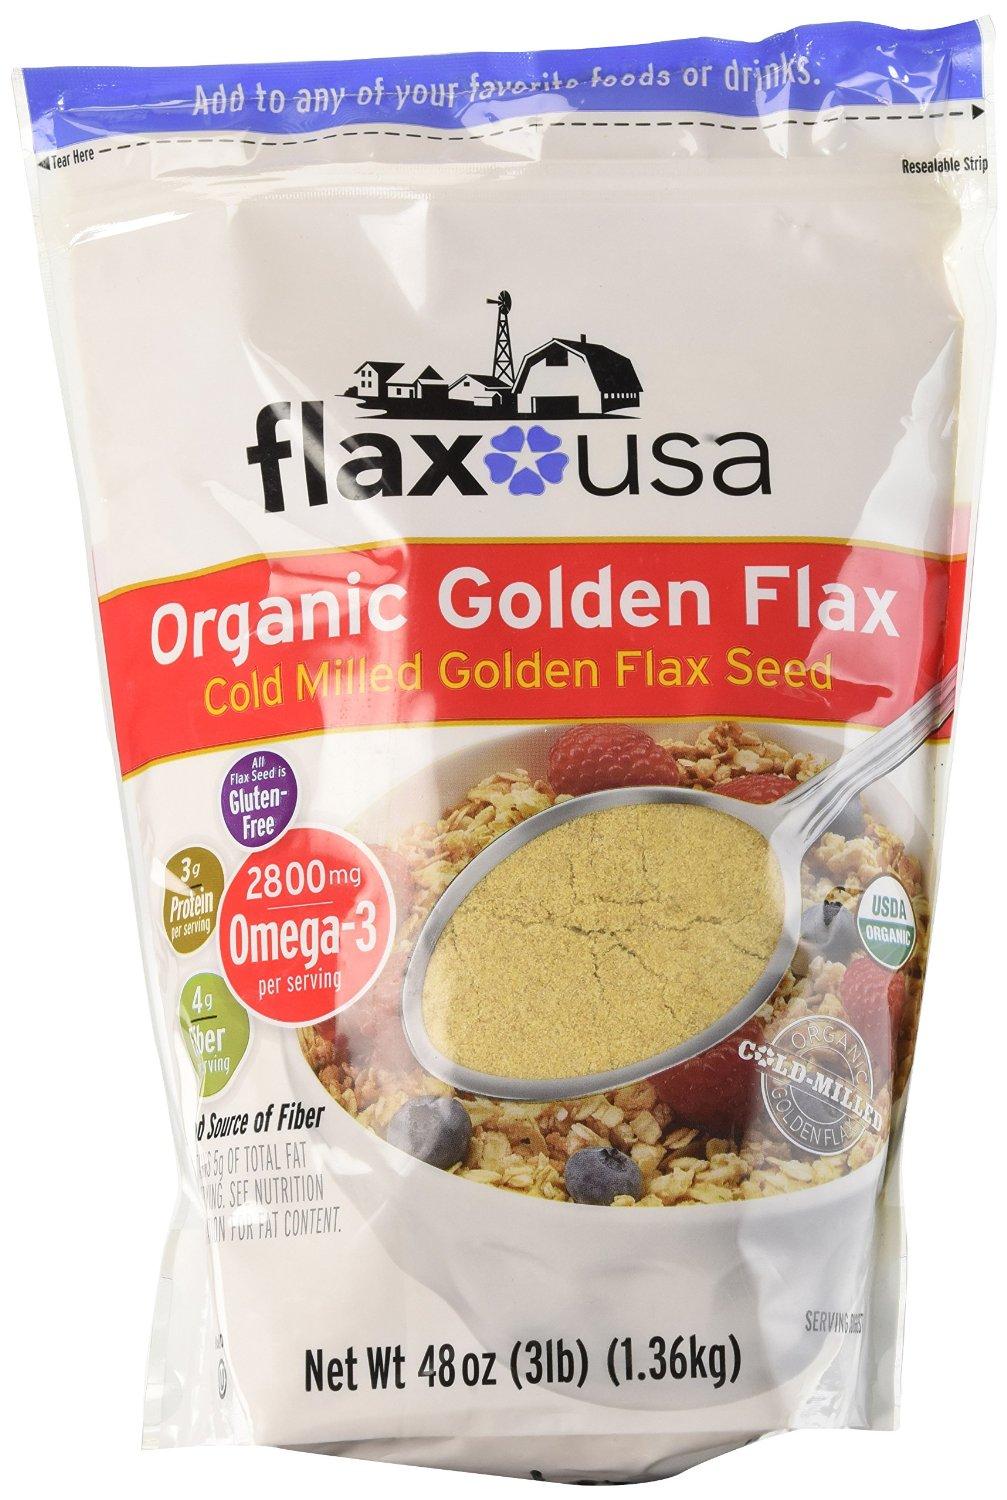 Flax USA 100% Natural Organic Flax Cold Milled Ground Golden Flax Seed, 48-Ounce Pack